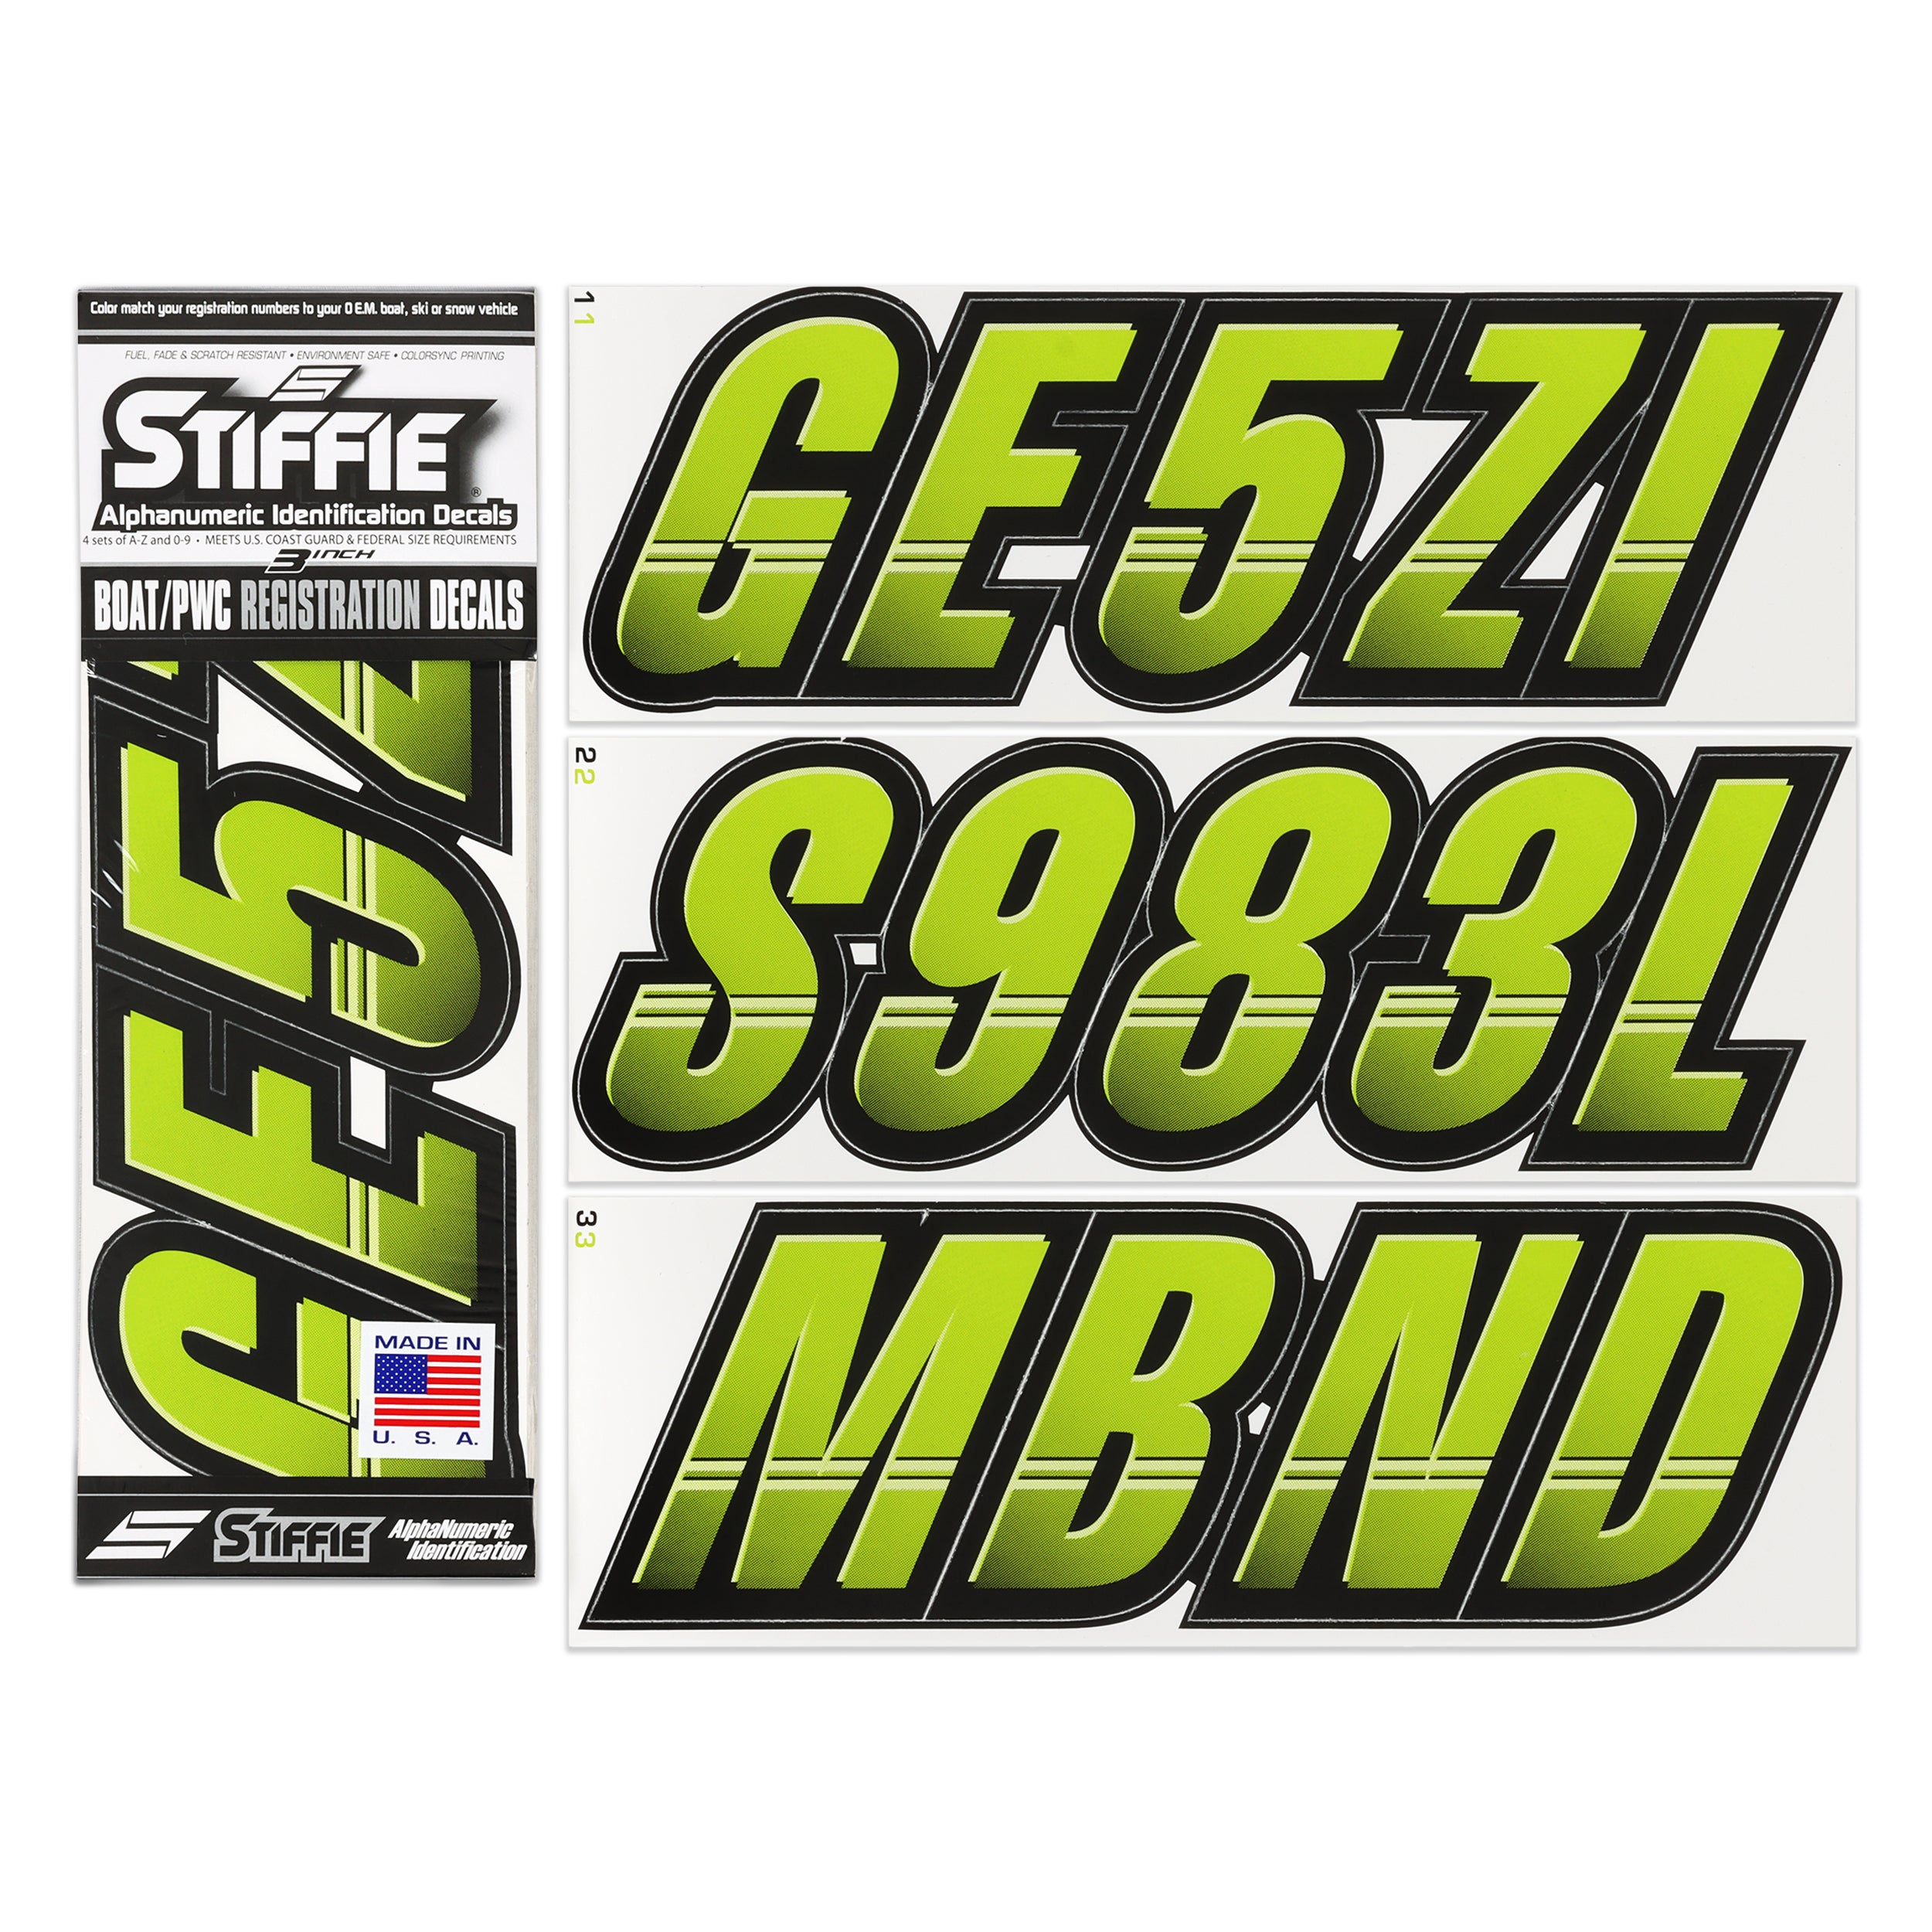 Stiffie Techtron Atomic Green/Black 3" Alpha-Numeric Registration Identification Numbers Stickers Decals for Boats & Personal Watercraft